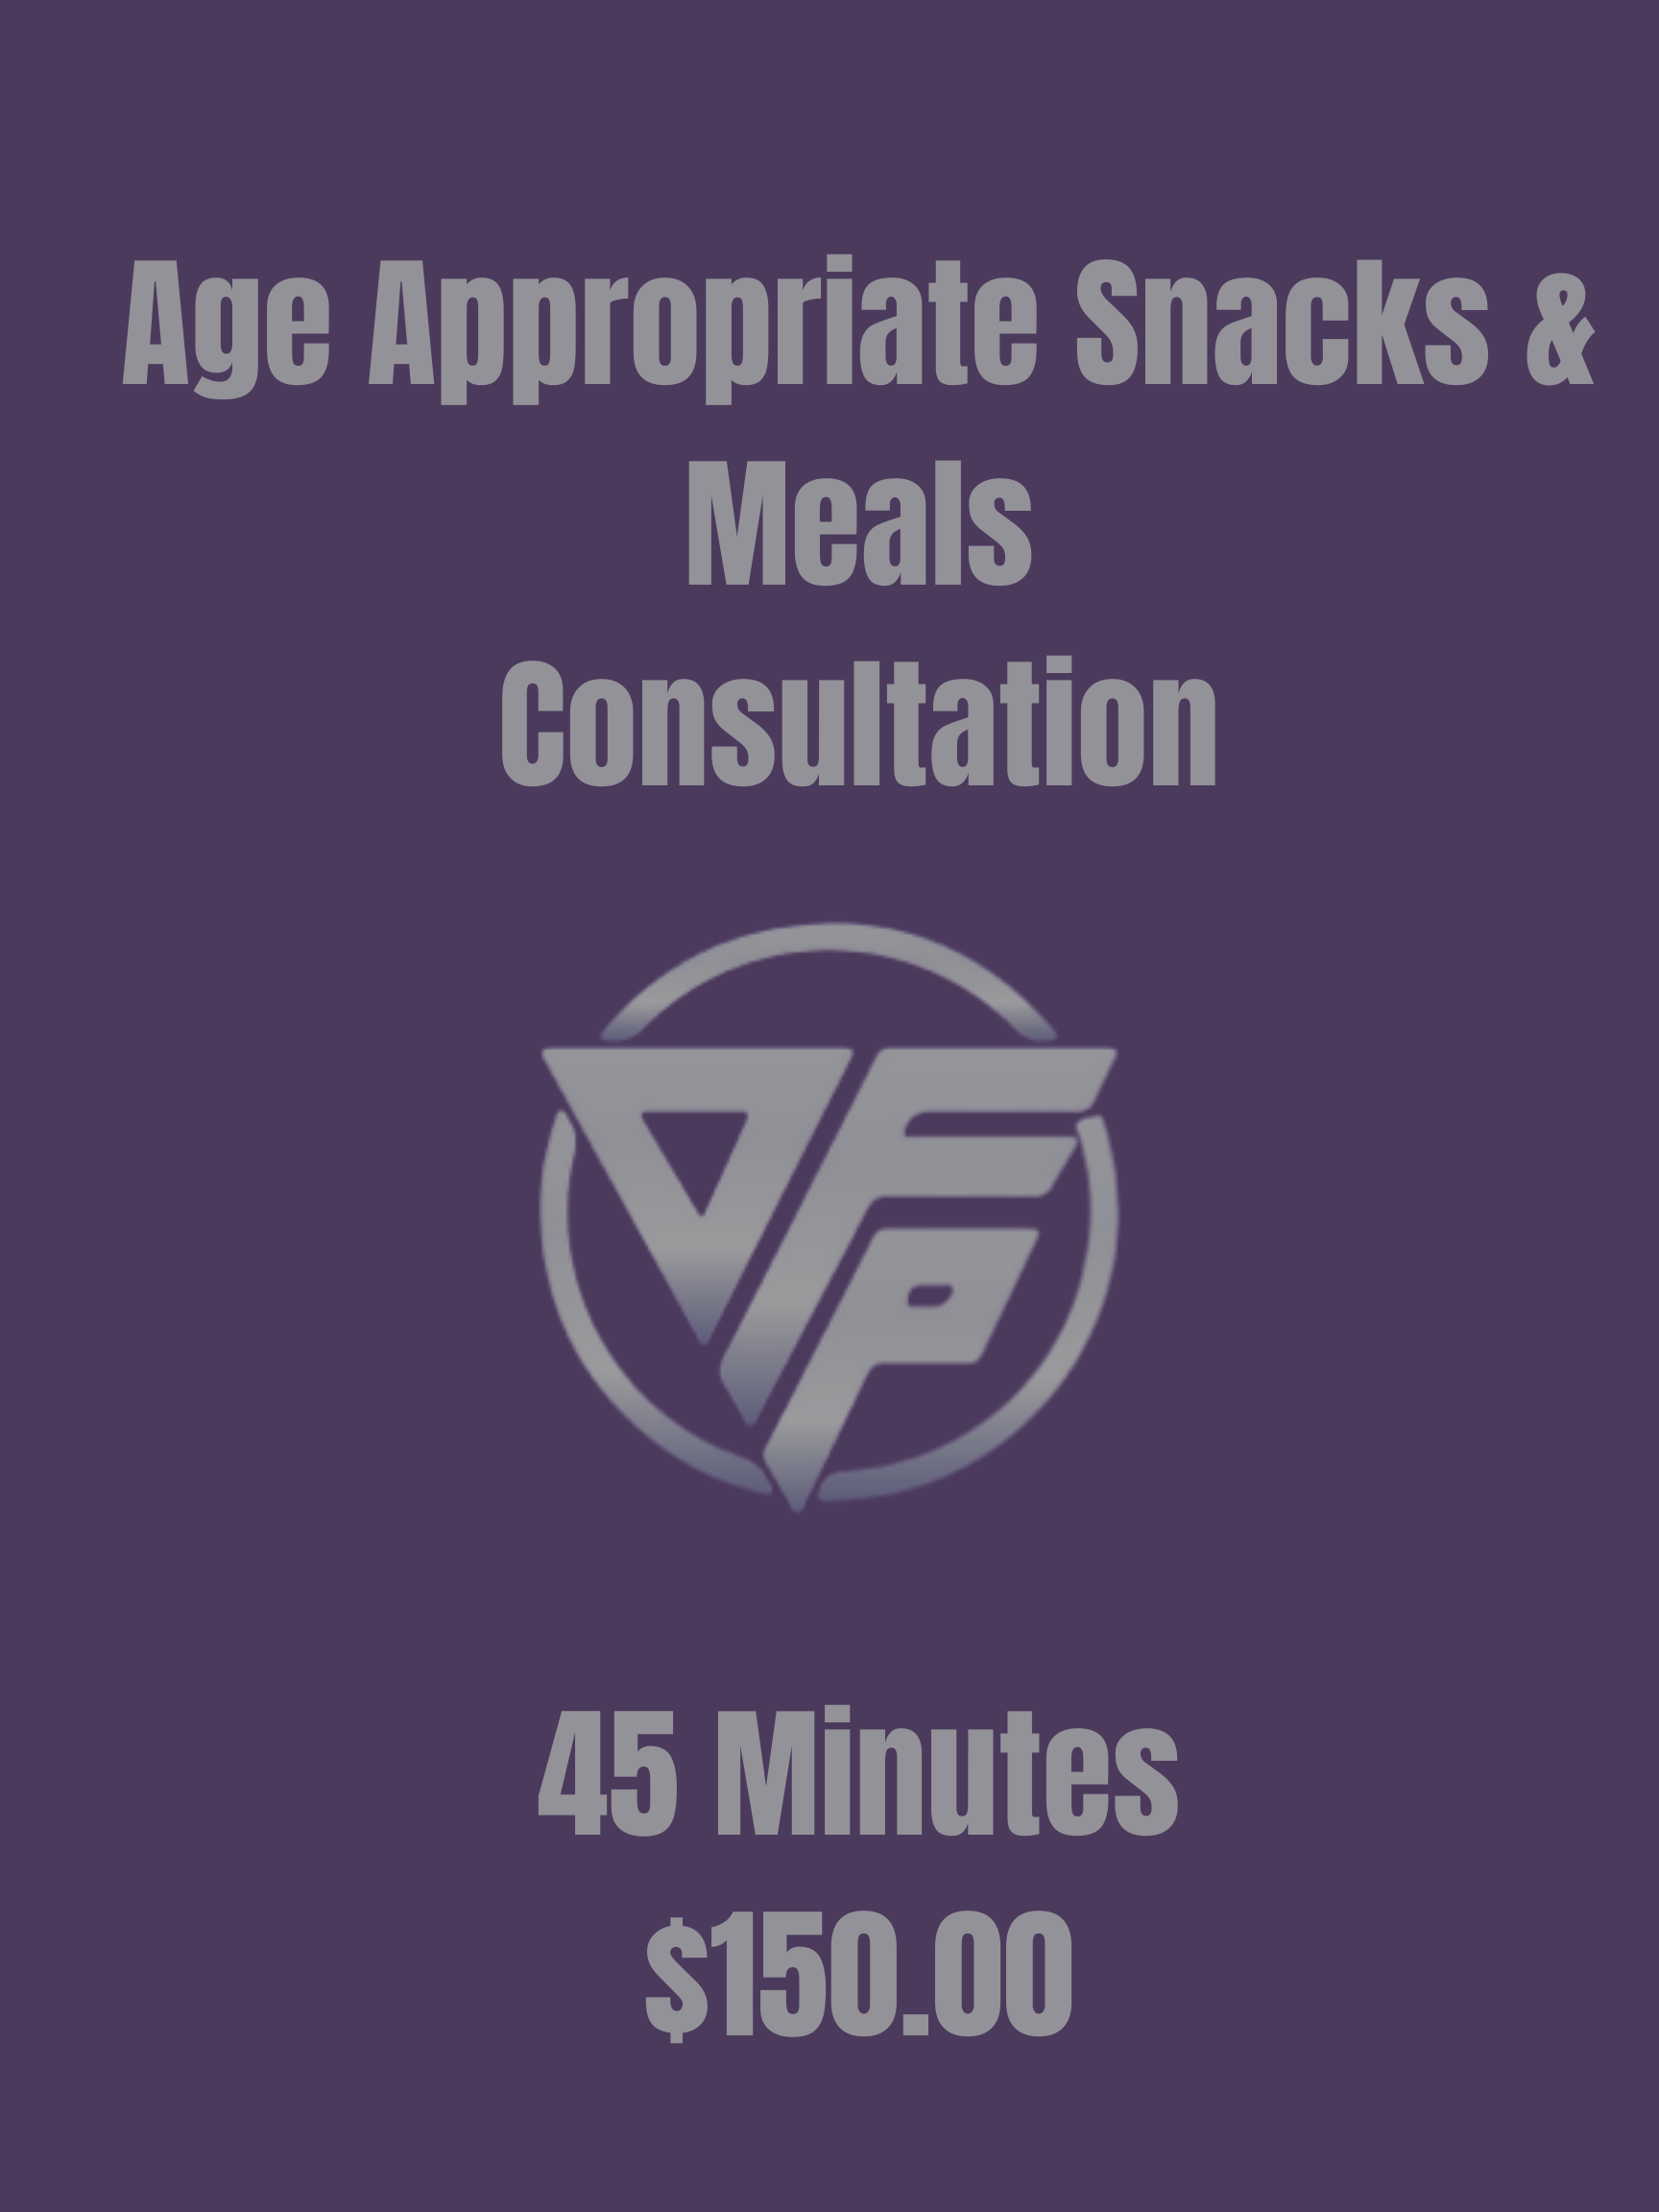 Age Appropriate Snacks and Meals, consultation